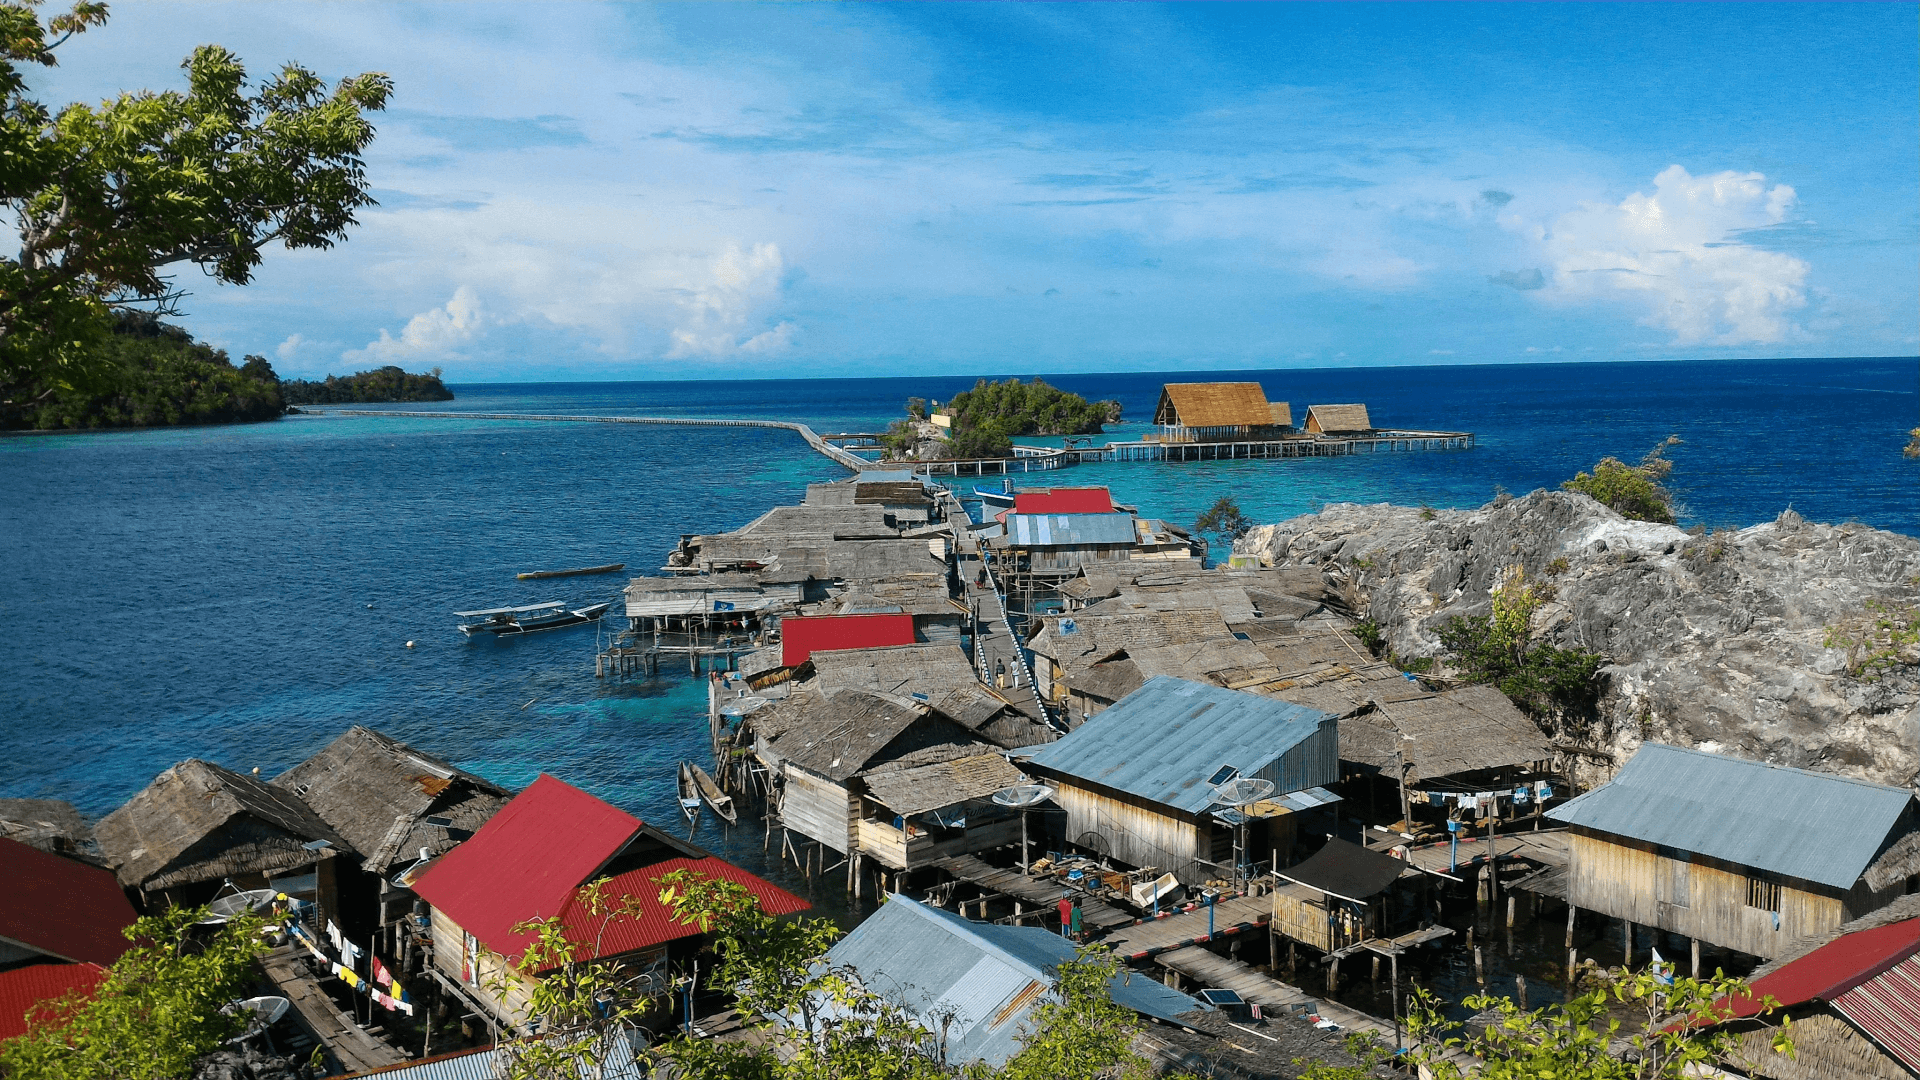 Stilt Village Pulau Papan in the gulf of Tomini at Togian Islands Sulawesi, Indonesia